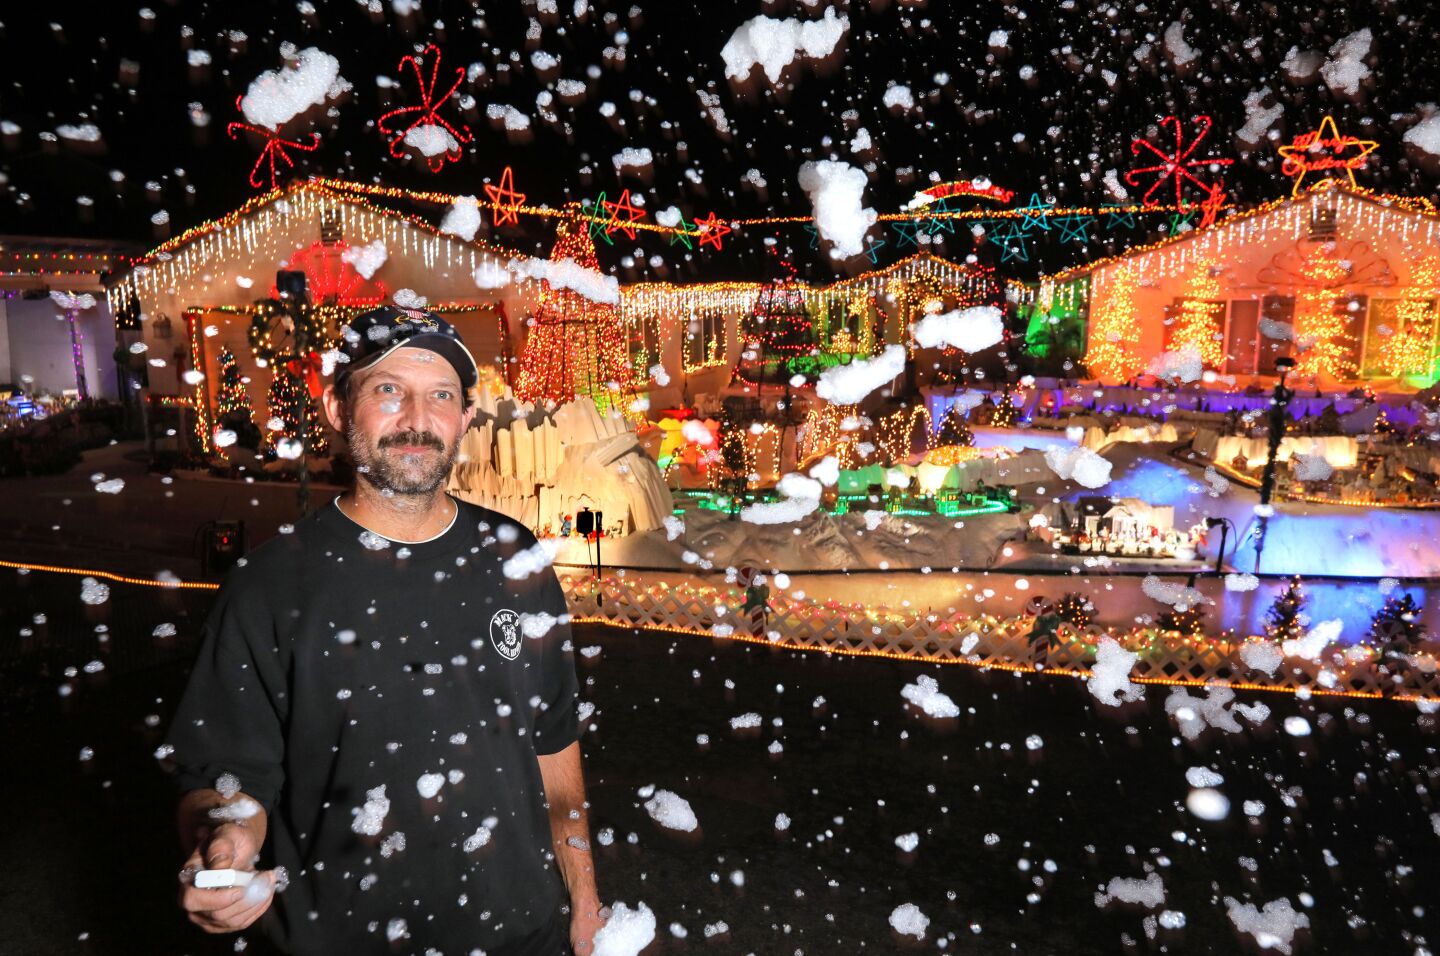 Mack Schreiber uses the remote control of a snow machine to rain down snowy looking soap bubbles at his Christmas decorated home on Reche Road in Fallbrook.